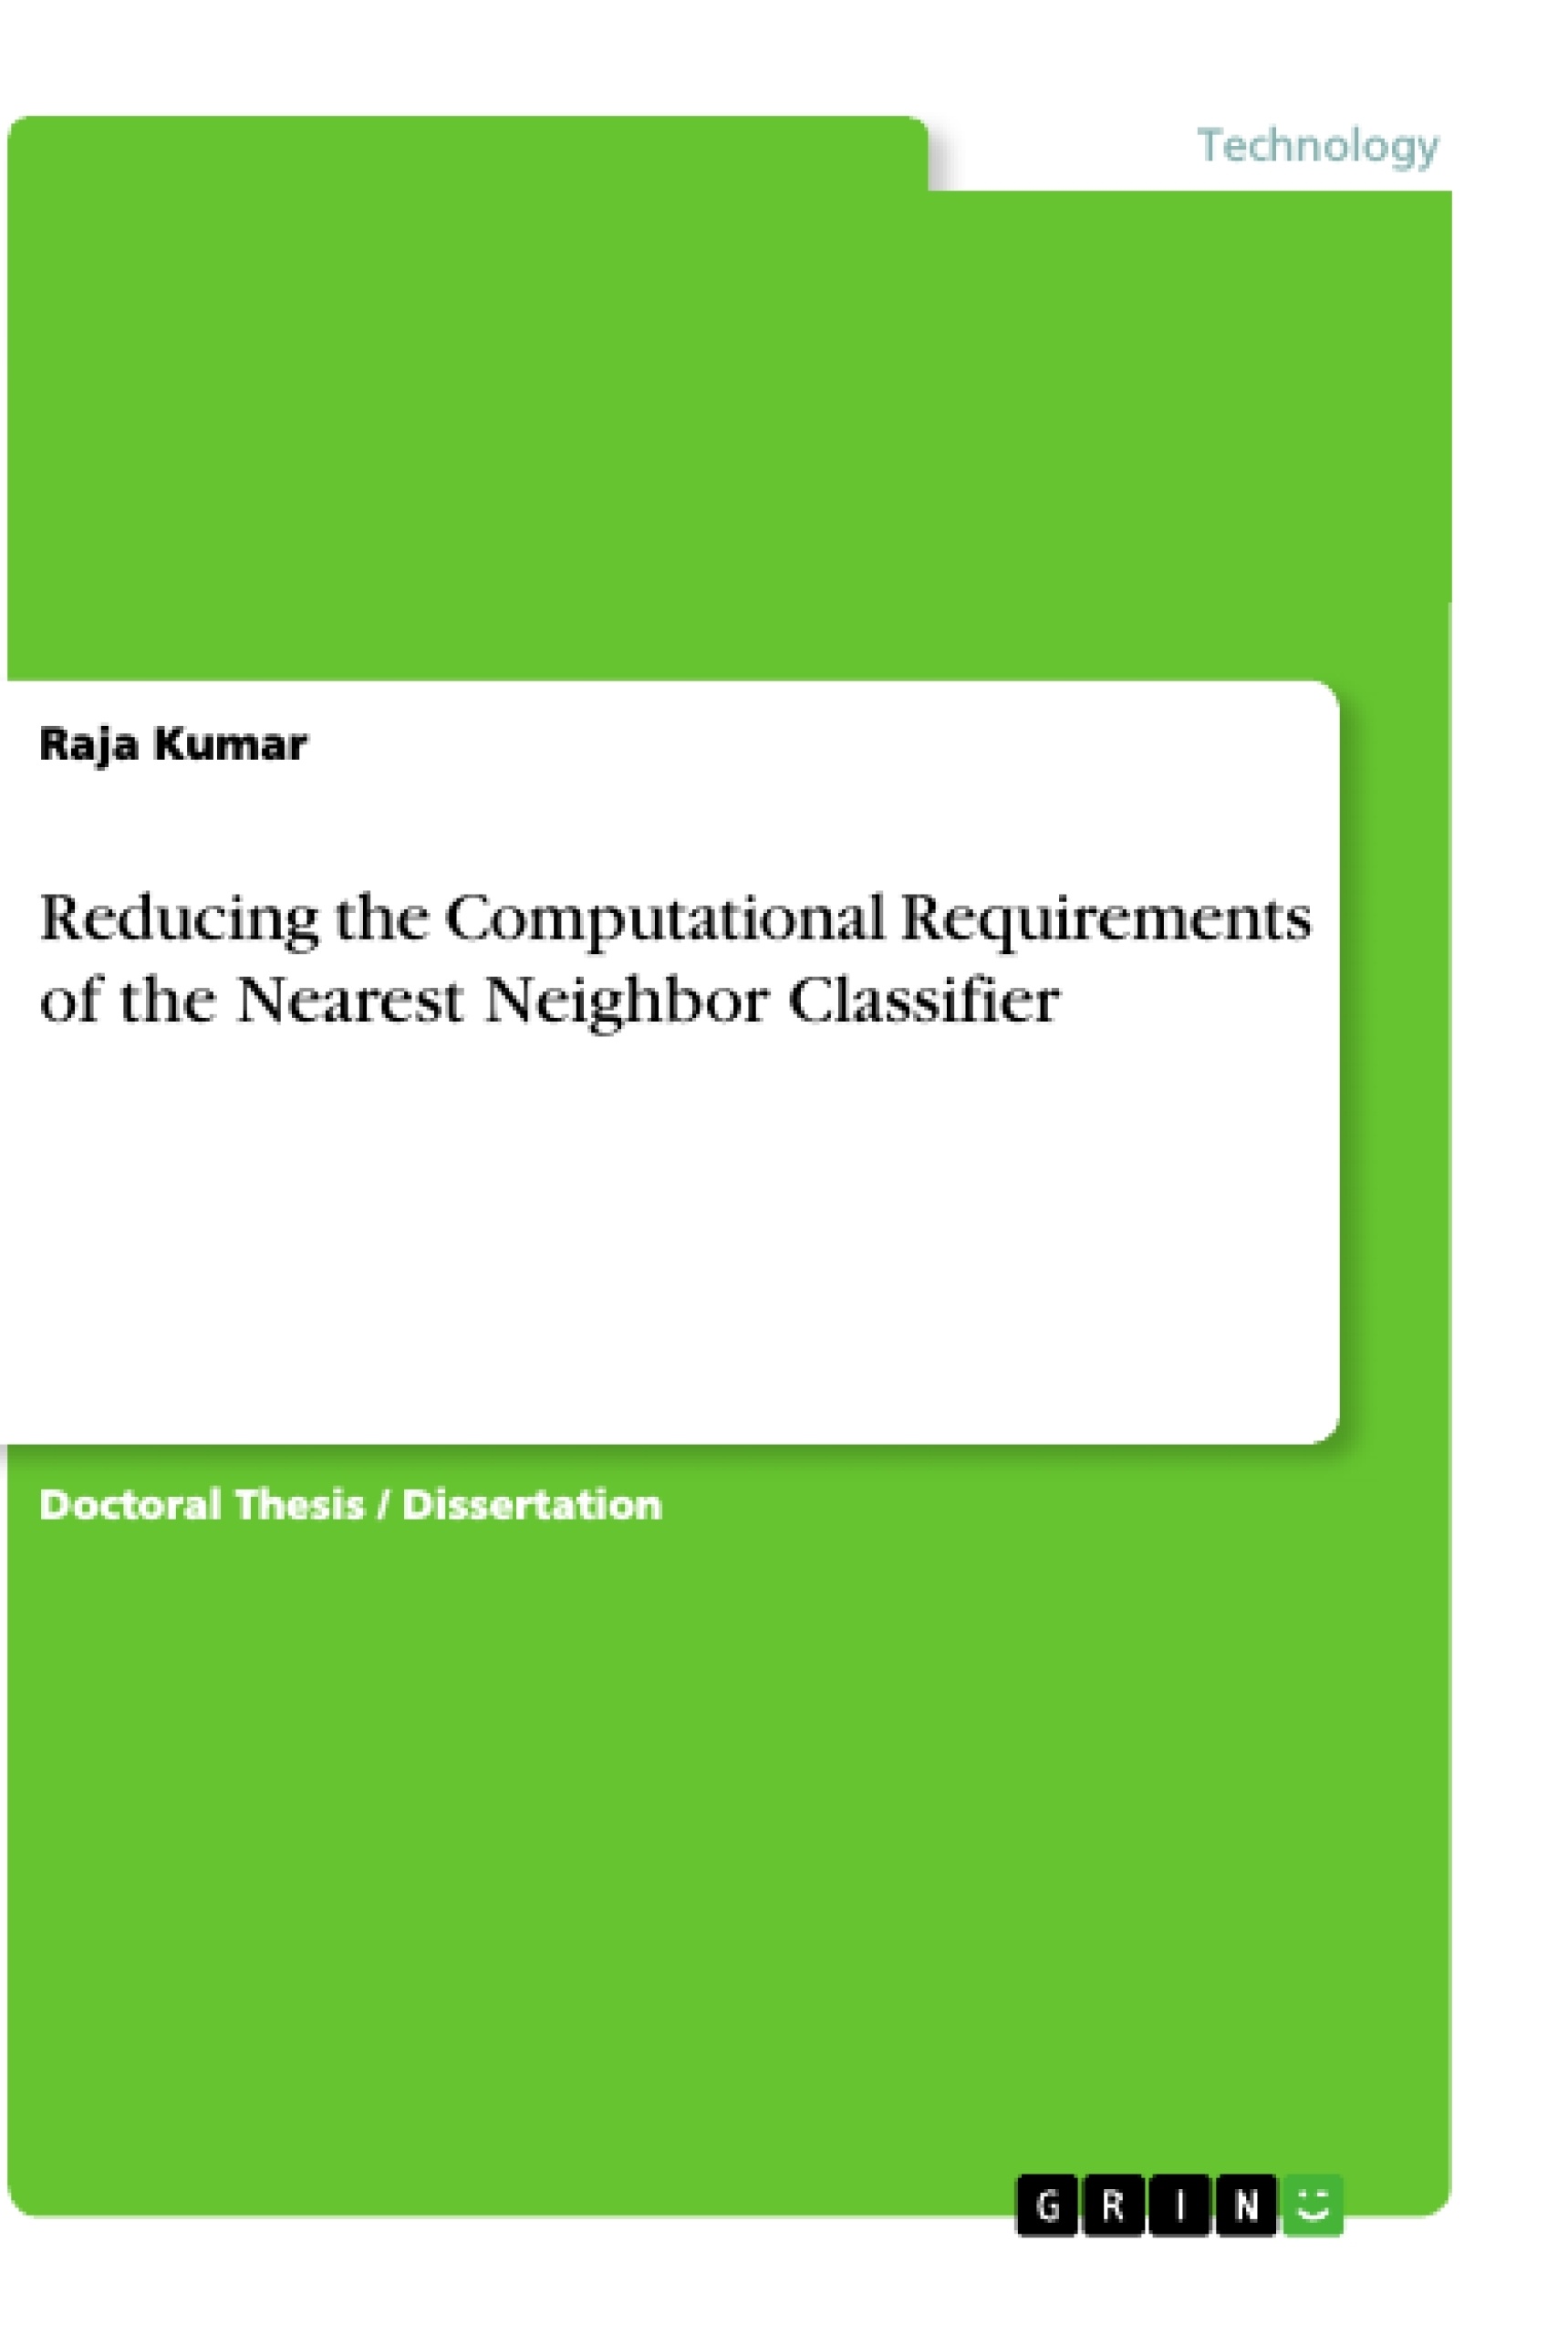 Titre: Reducing the Computational Requirements of the Nearest Neighbor Classifier